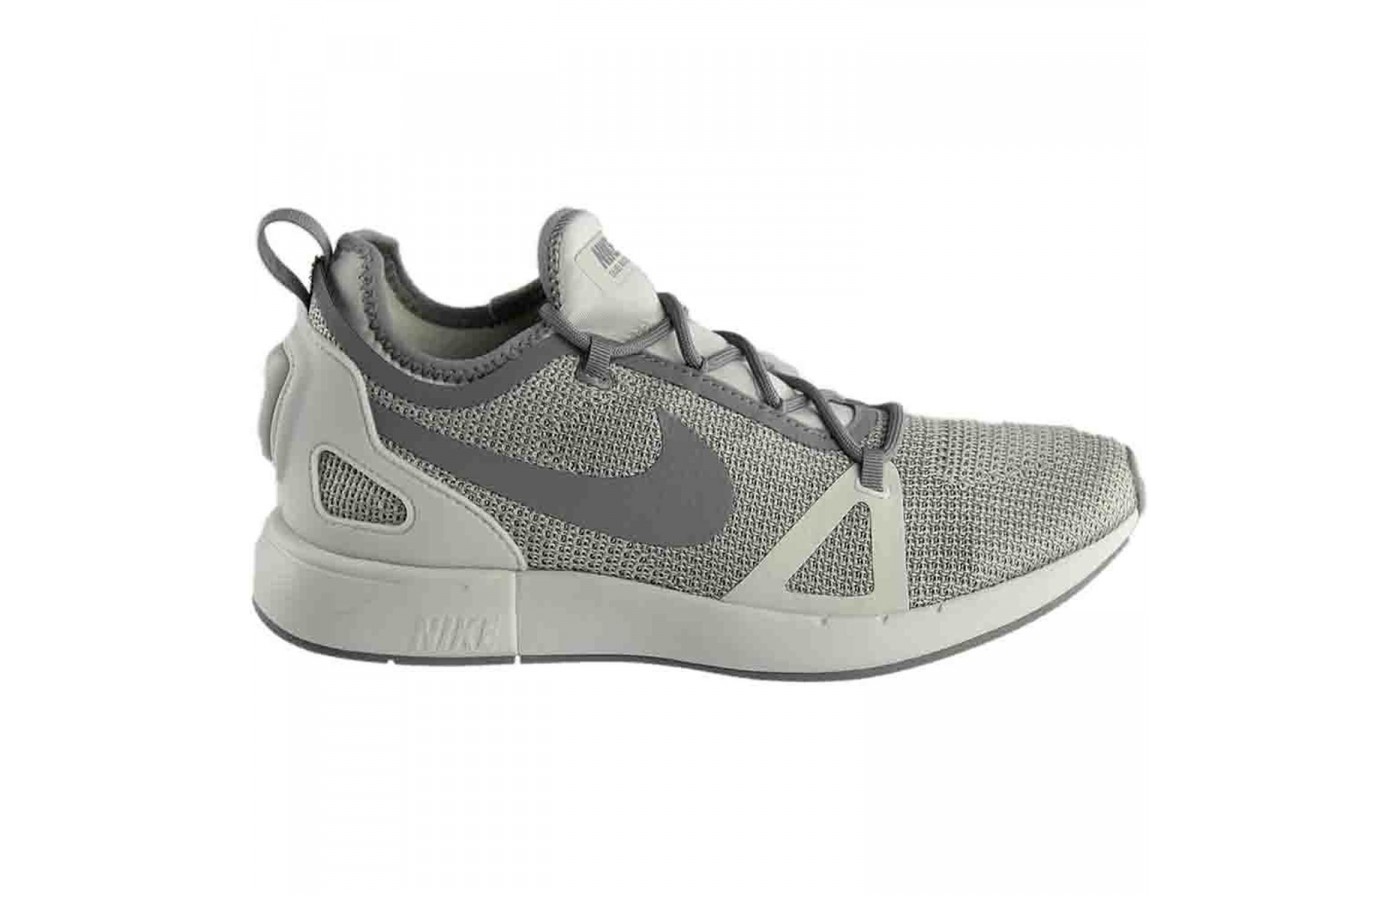 The Nike Duel Racer in a tri-toned grey colorway